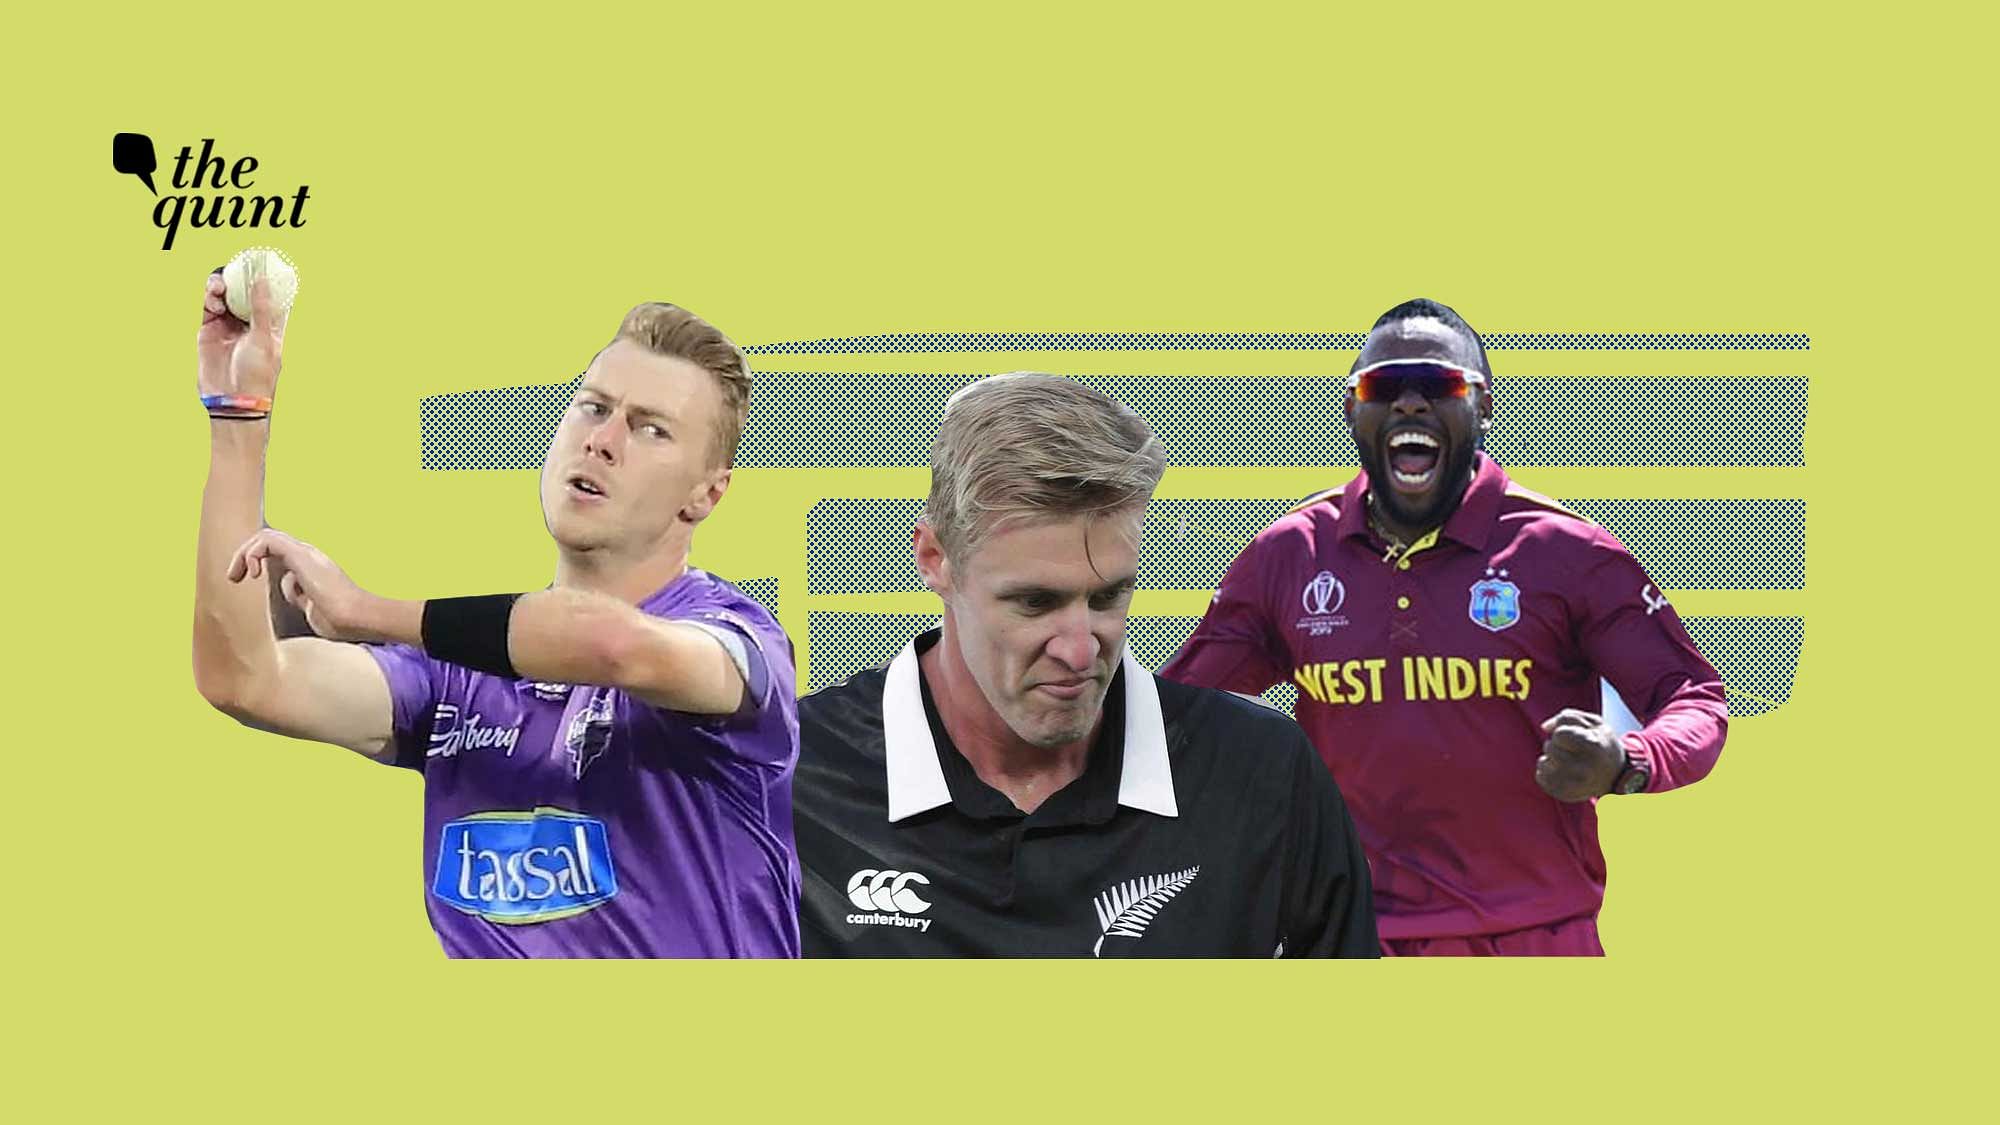 Here’s a look at some of the overseas players to look out for in IPL 2021